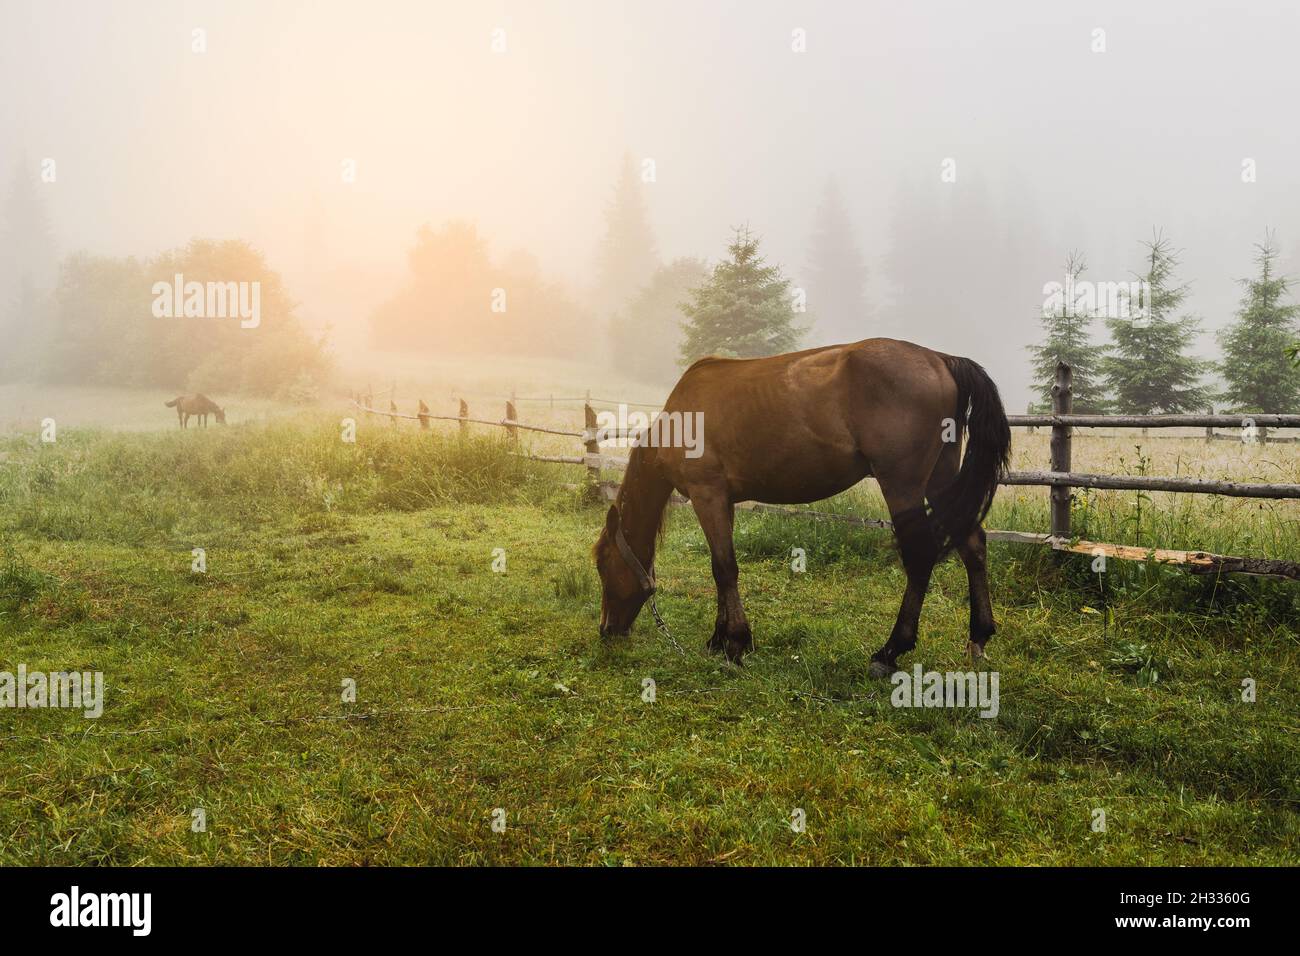 Dramatic foggy scene with brown horse eating grass on a foggy countryside meadow. Old wooden fence. Carpathians, Ukraine, Europe. Stock Photo